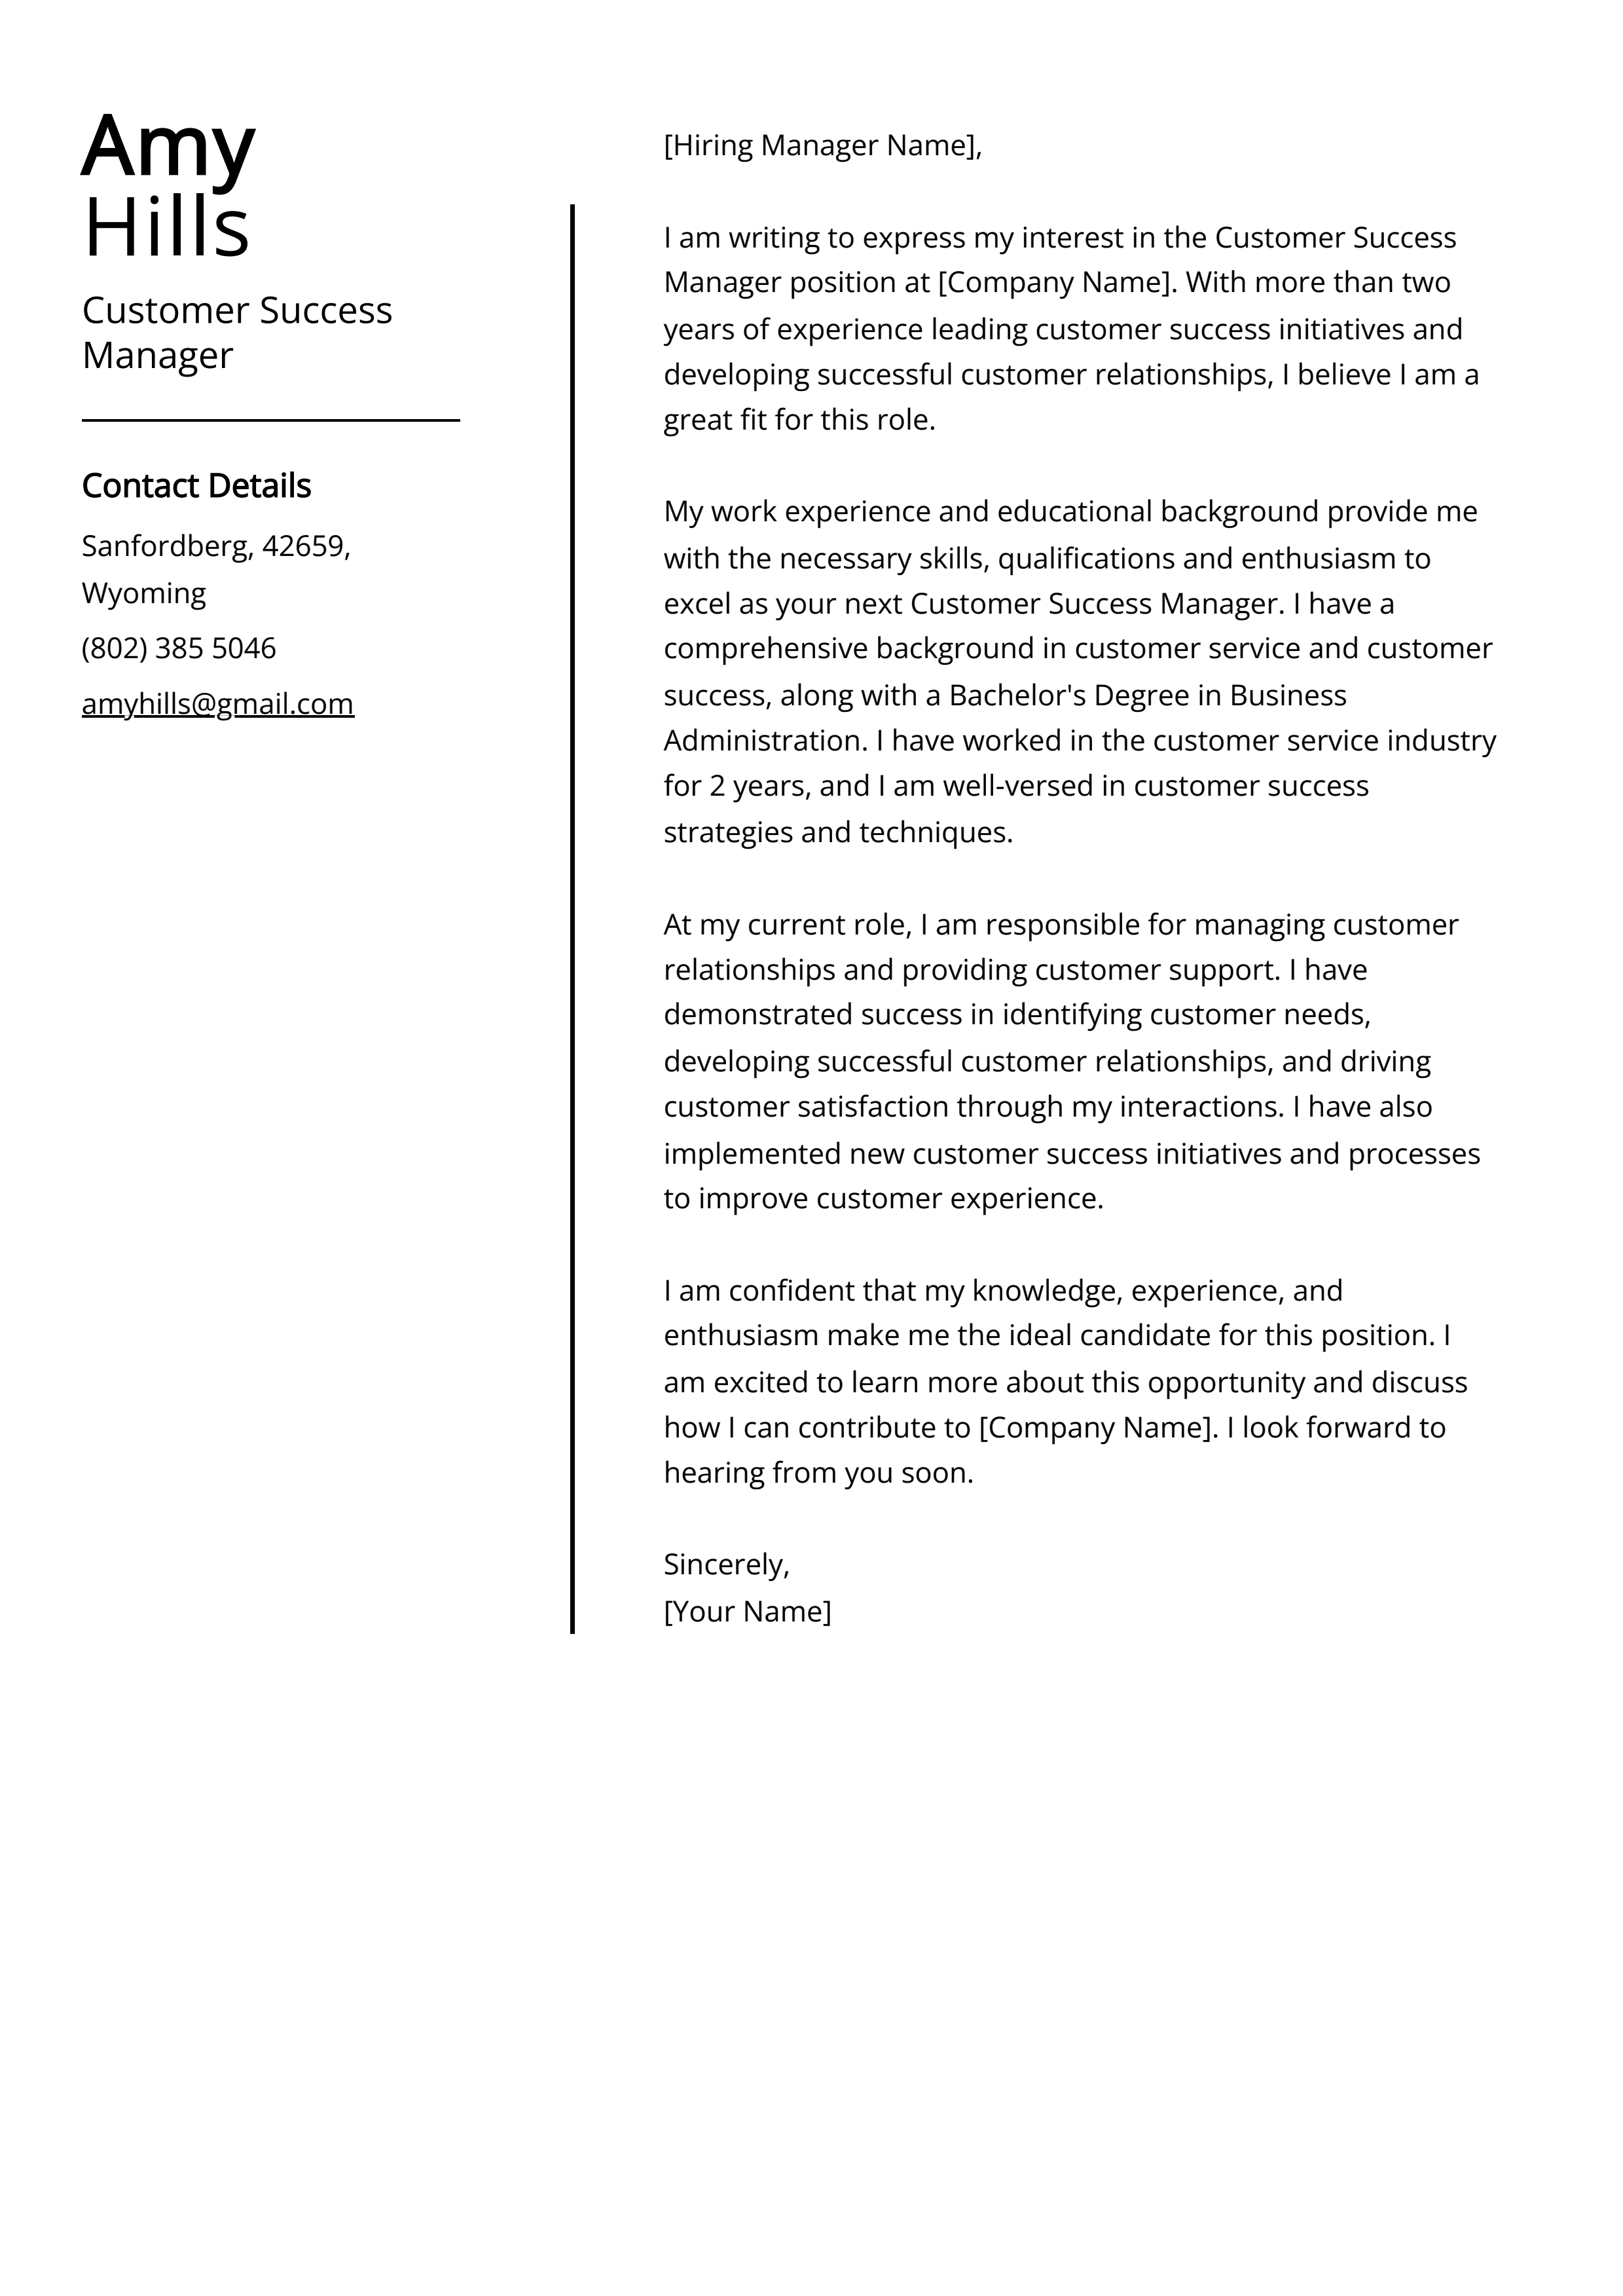 Customer Success Manager Cover Letter Example